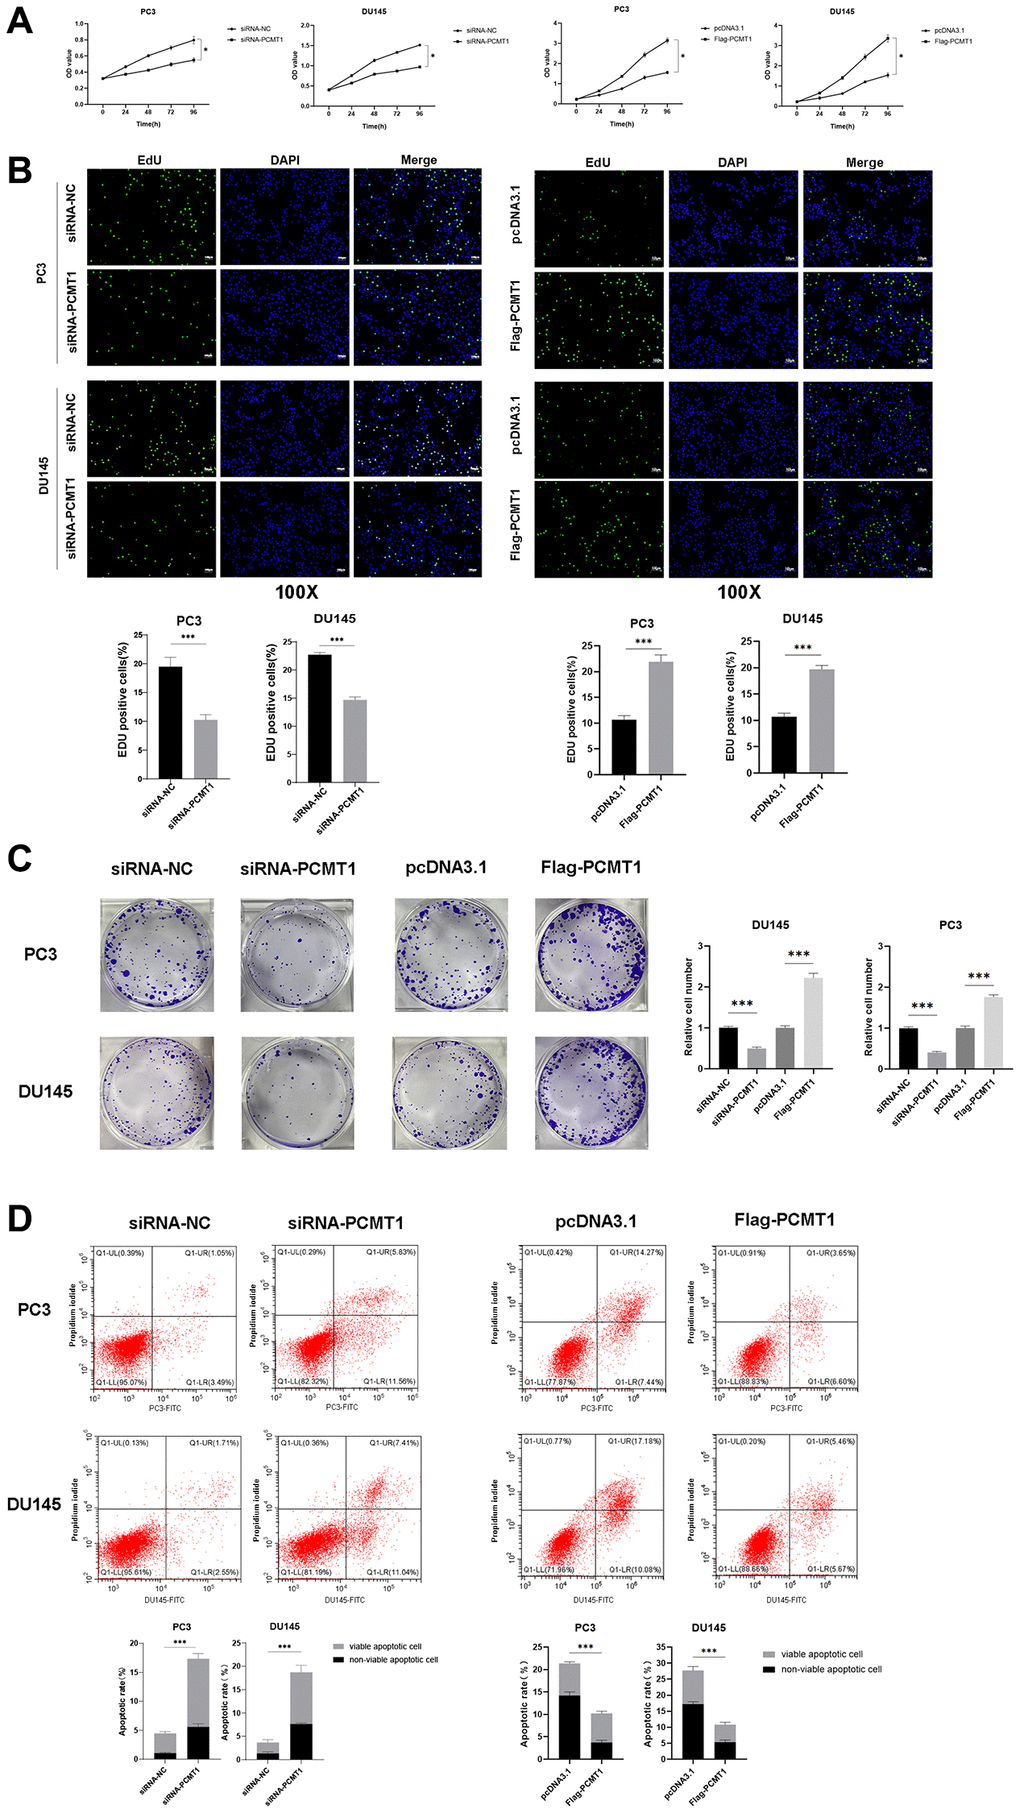 Impact of PCMT1 inhibition on the proliferation and apoptosis of PCa cells. (A, B) Effect of PCMT1 inhibition and overexpression on PCa cell proliferation measured by a CCK-8 assay or EdU assay. (C) Effect of PCMT1 inhibition and overexpression on PCa cell proliferation measured by a colony formation experiment. (D) Effect of PCMT1 inhibition and overexpression on PCa cell apoptosis measured by a flow cytometry assay. Data are expressed as mean ± SD of at least three experiments. ***P 